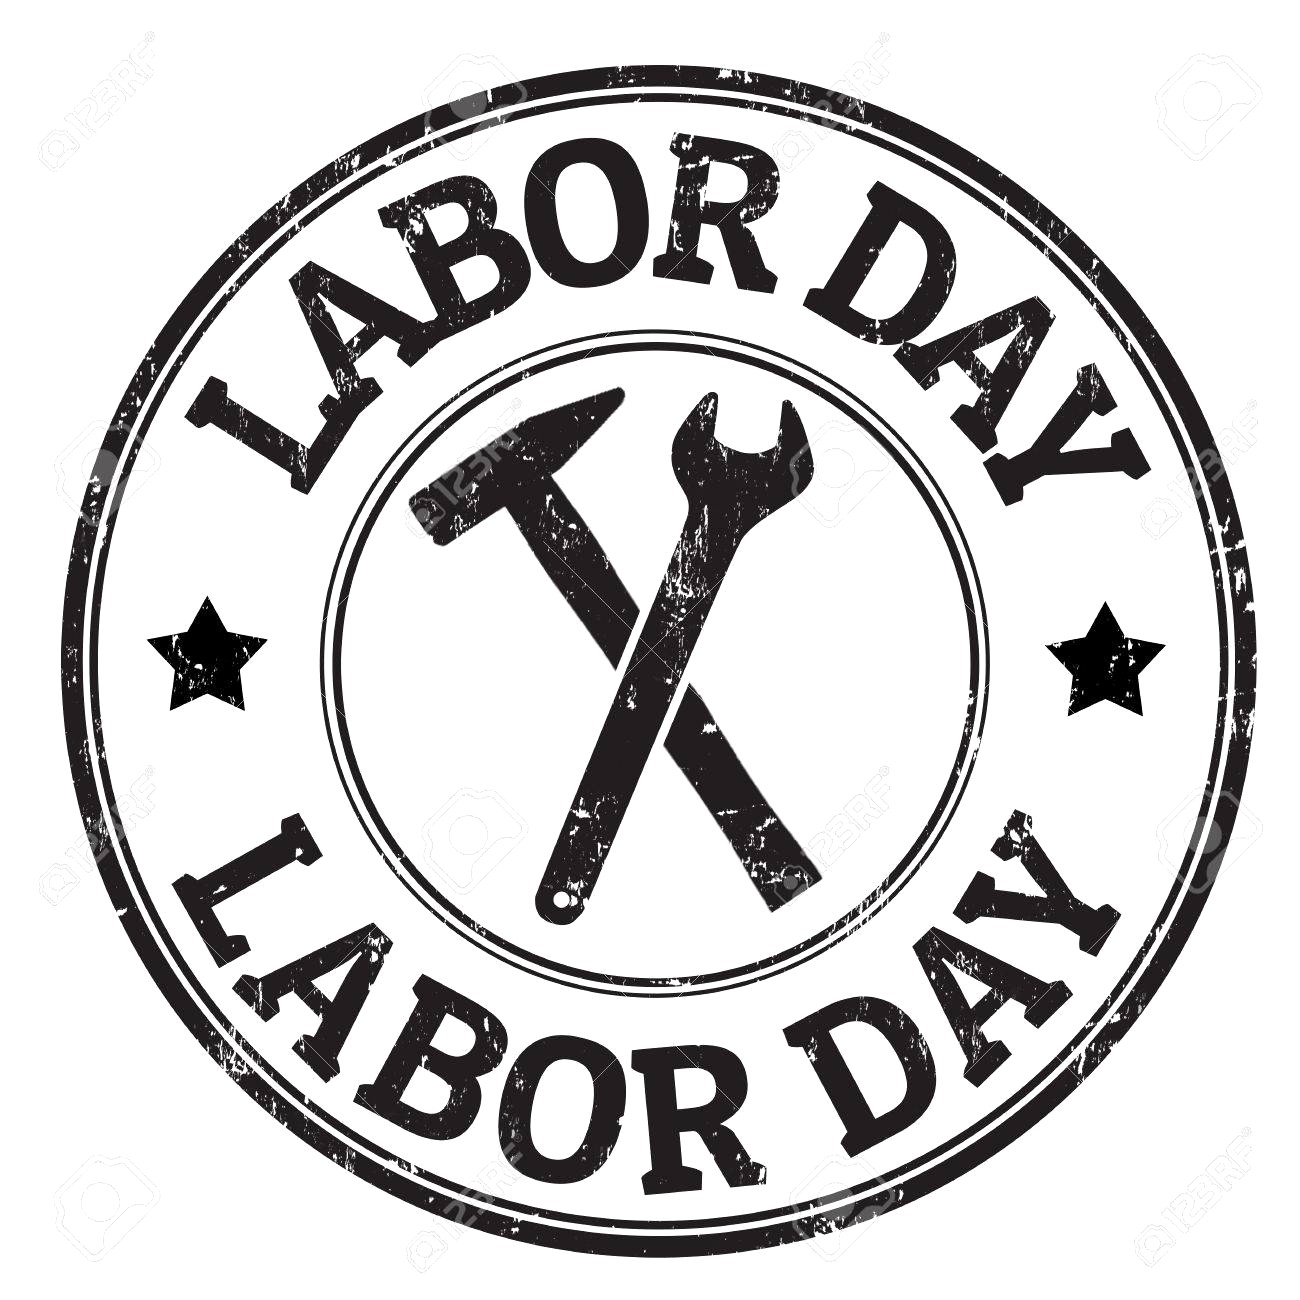 Labor day clipart black and white